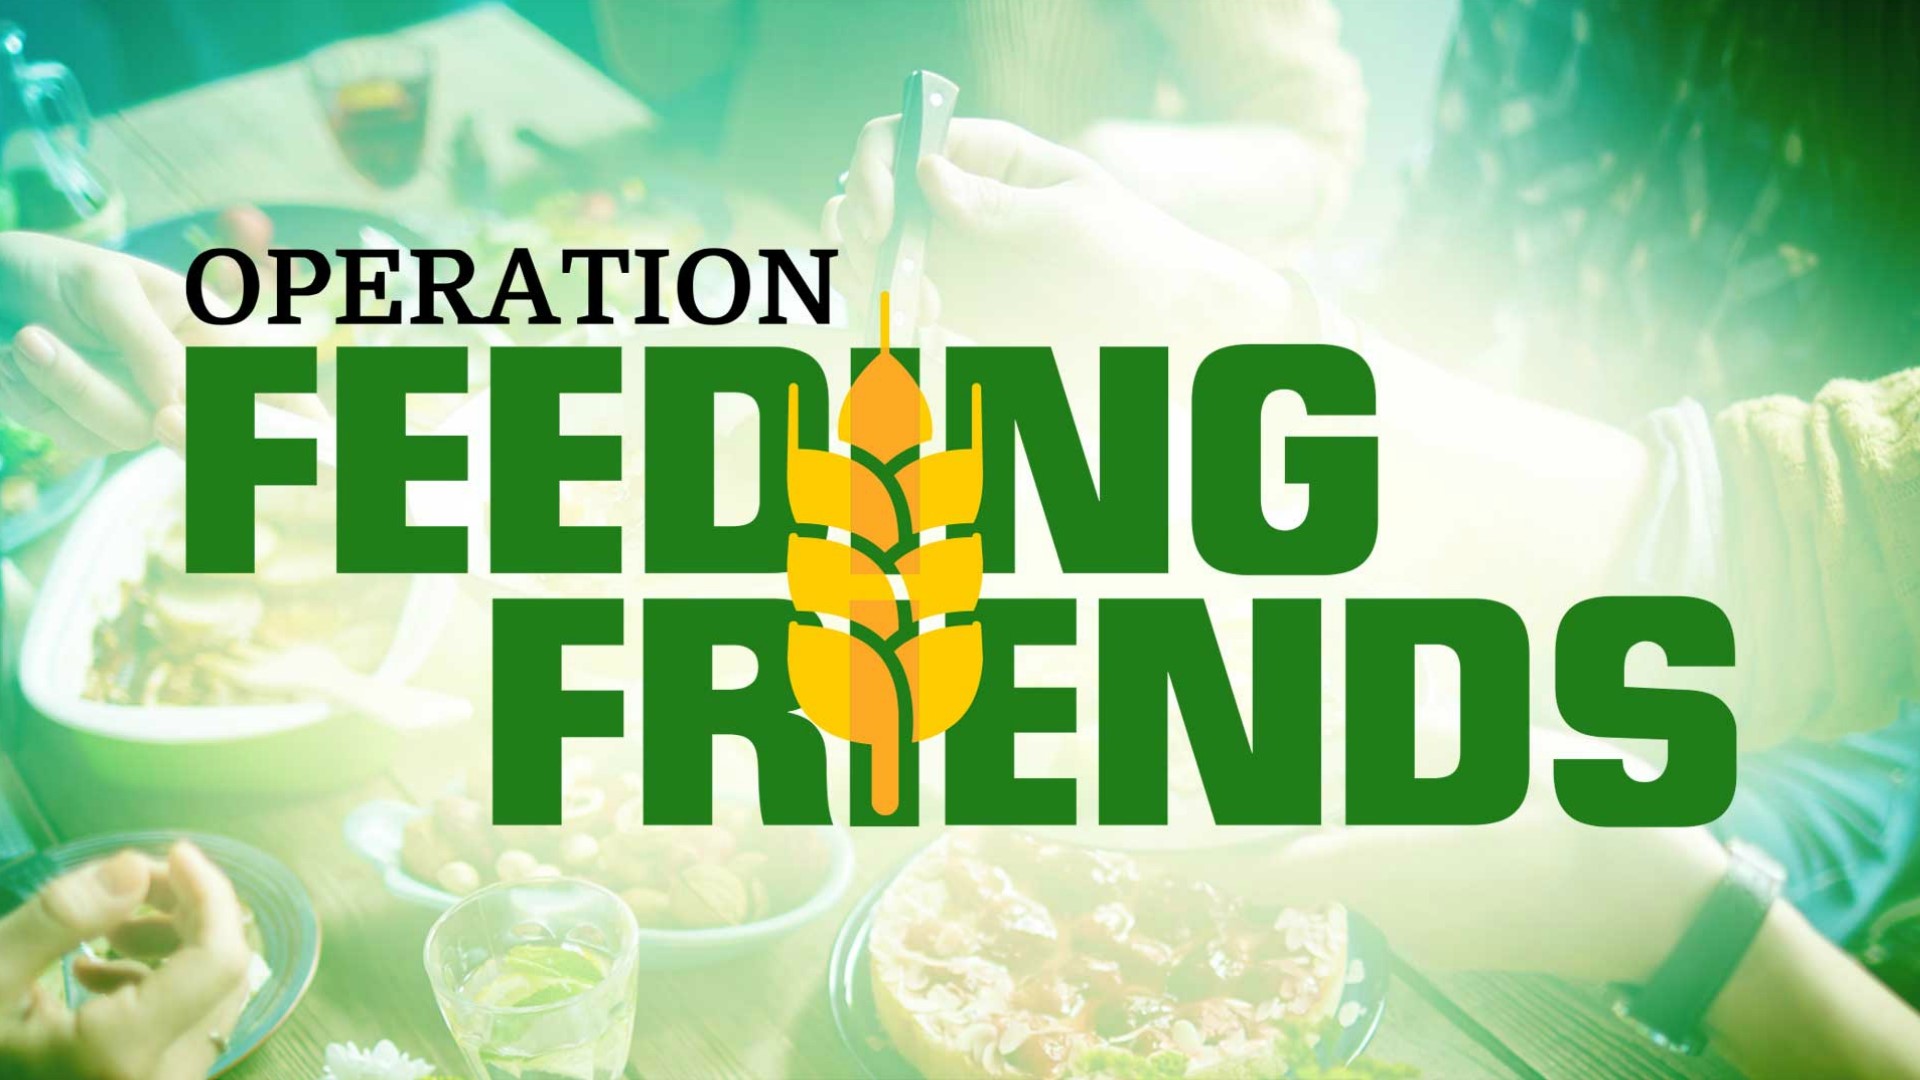 Help stock local pantry shelves through the Operation Feeding Friends Food Drive!